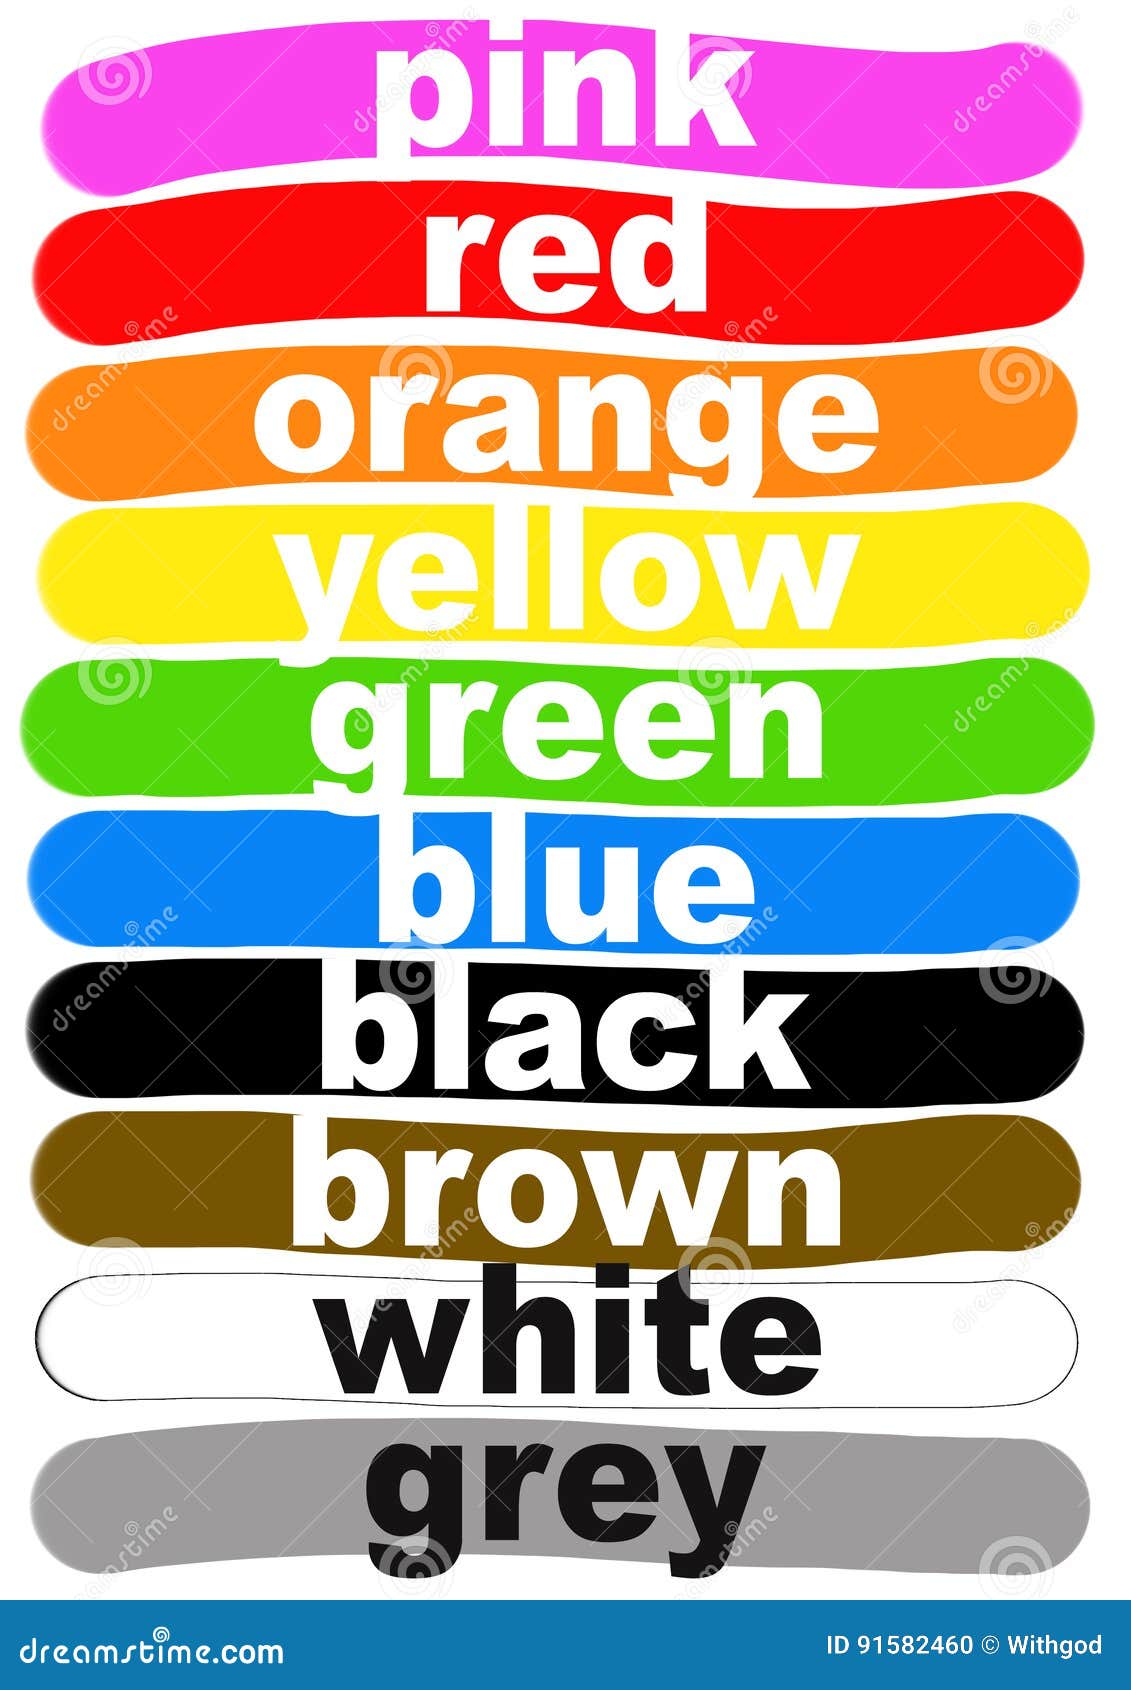 CORES EM INGLÊS - COLORS IN ENGLISH 